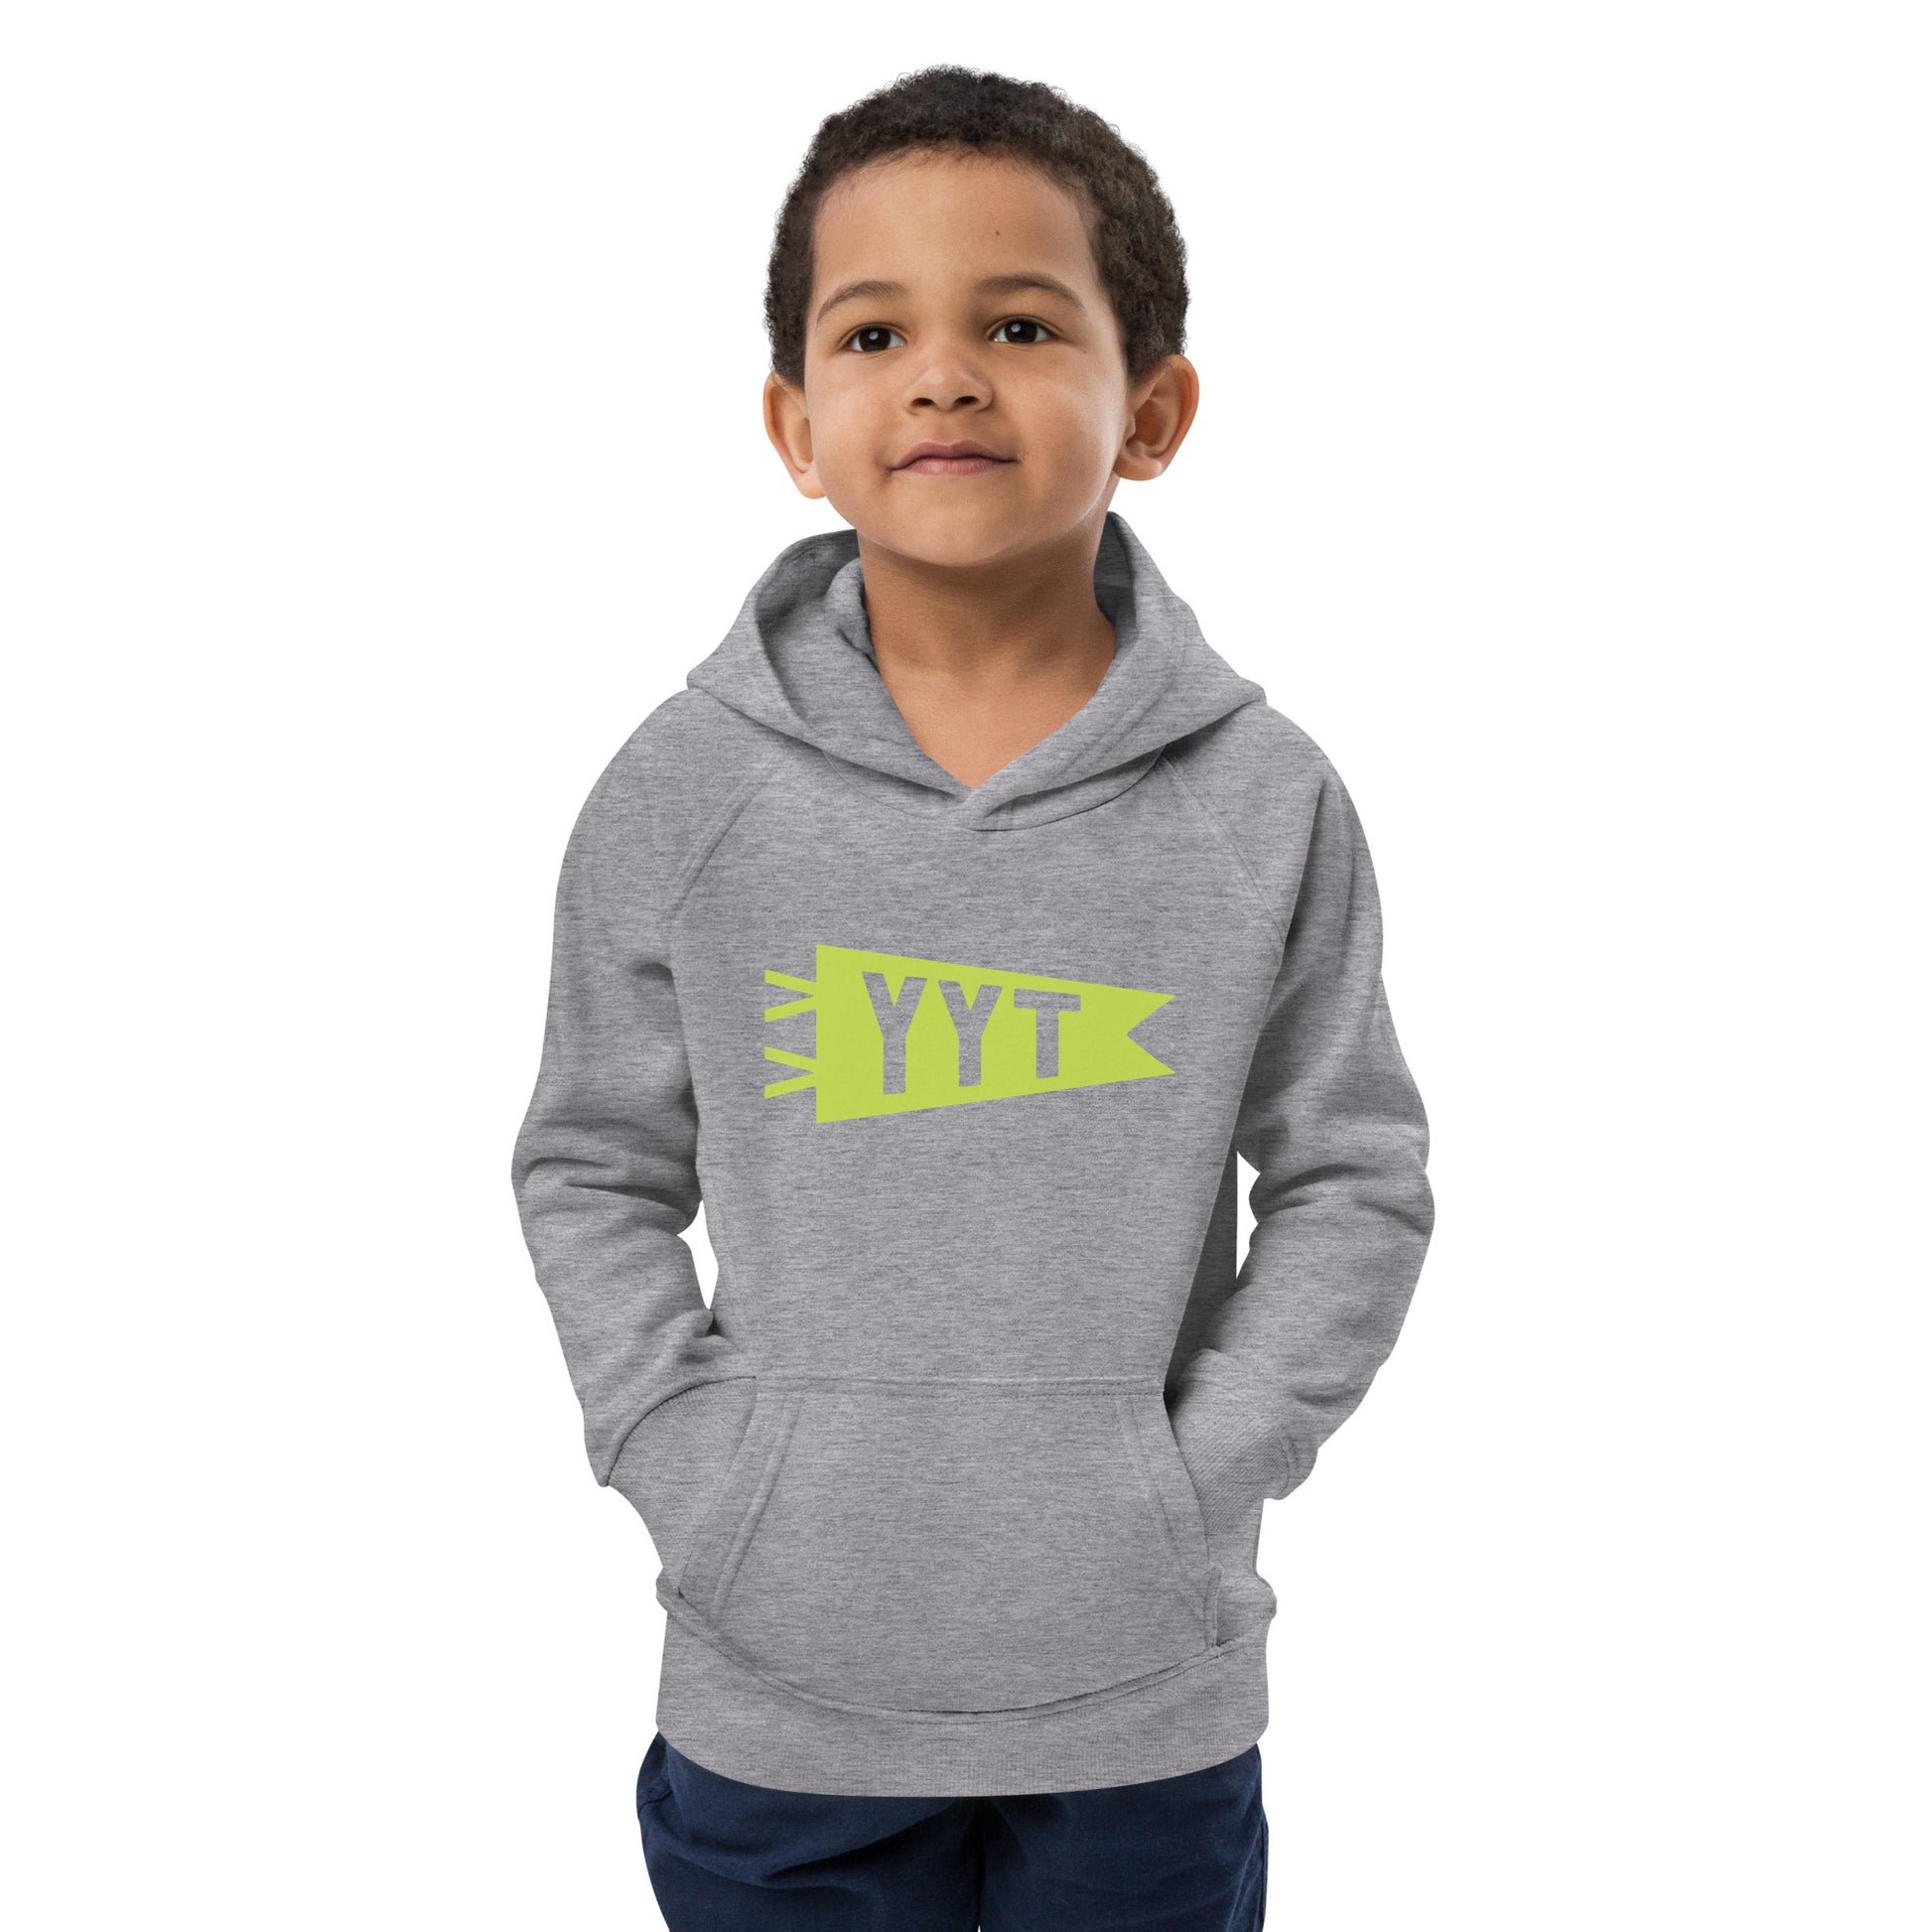 Kid's Sustainable Hoodie - Green Graphic • YYT St. John's • YHM Designs - Image 11